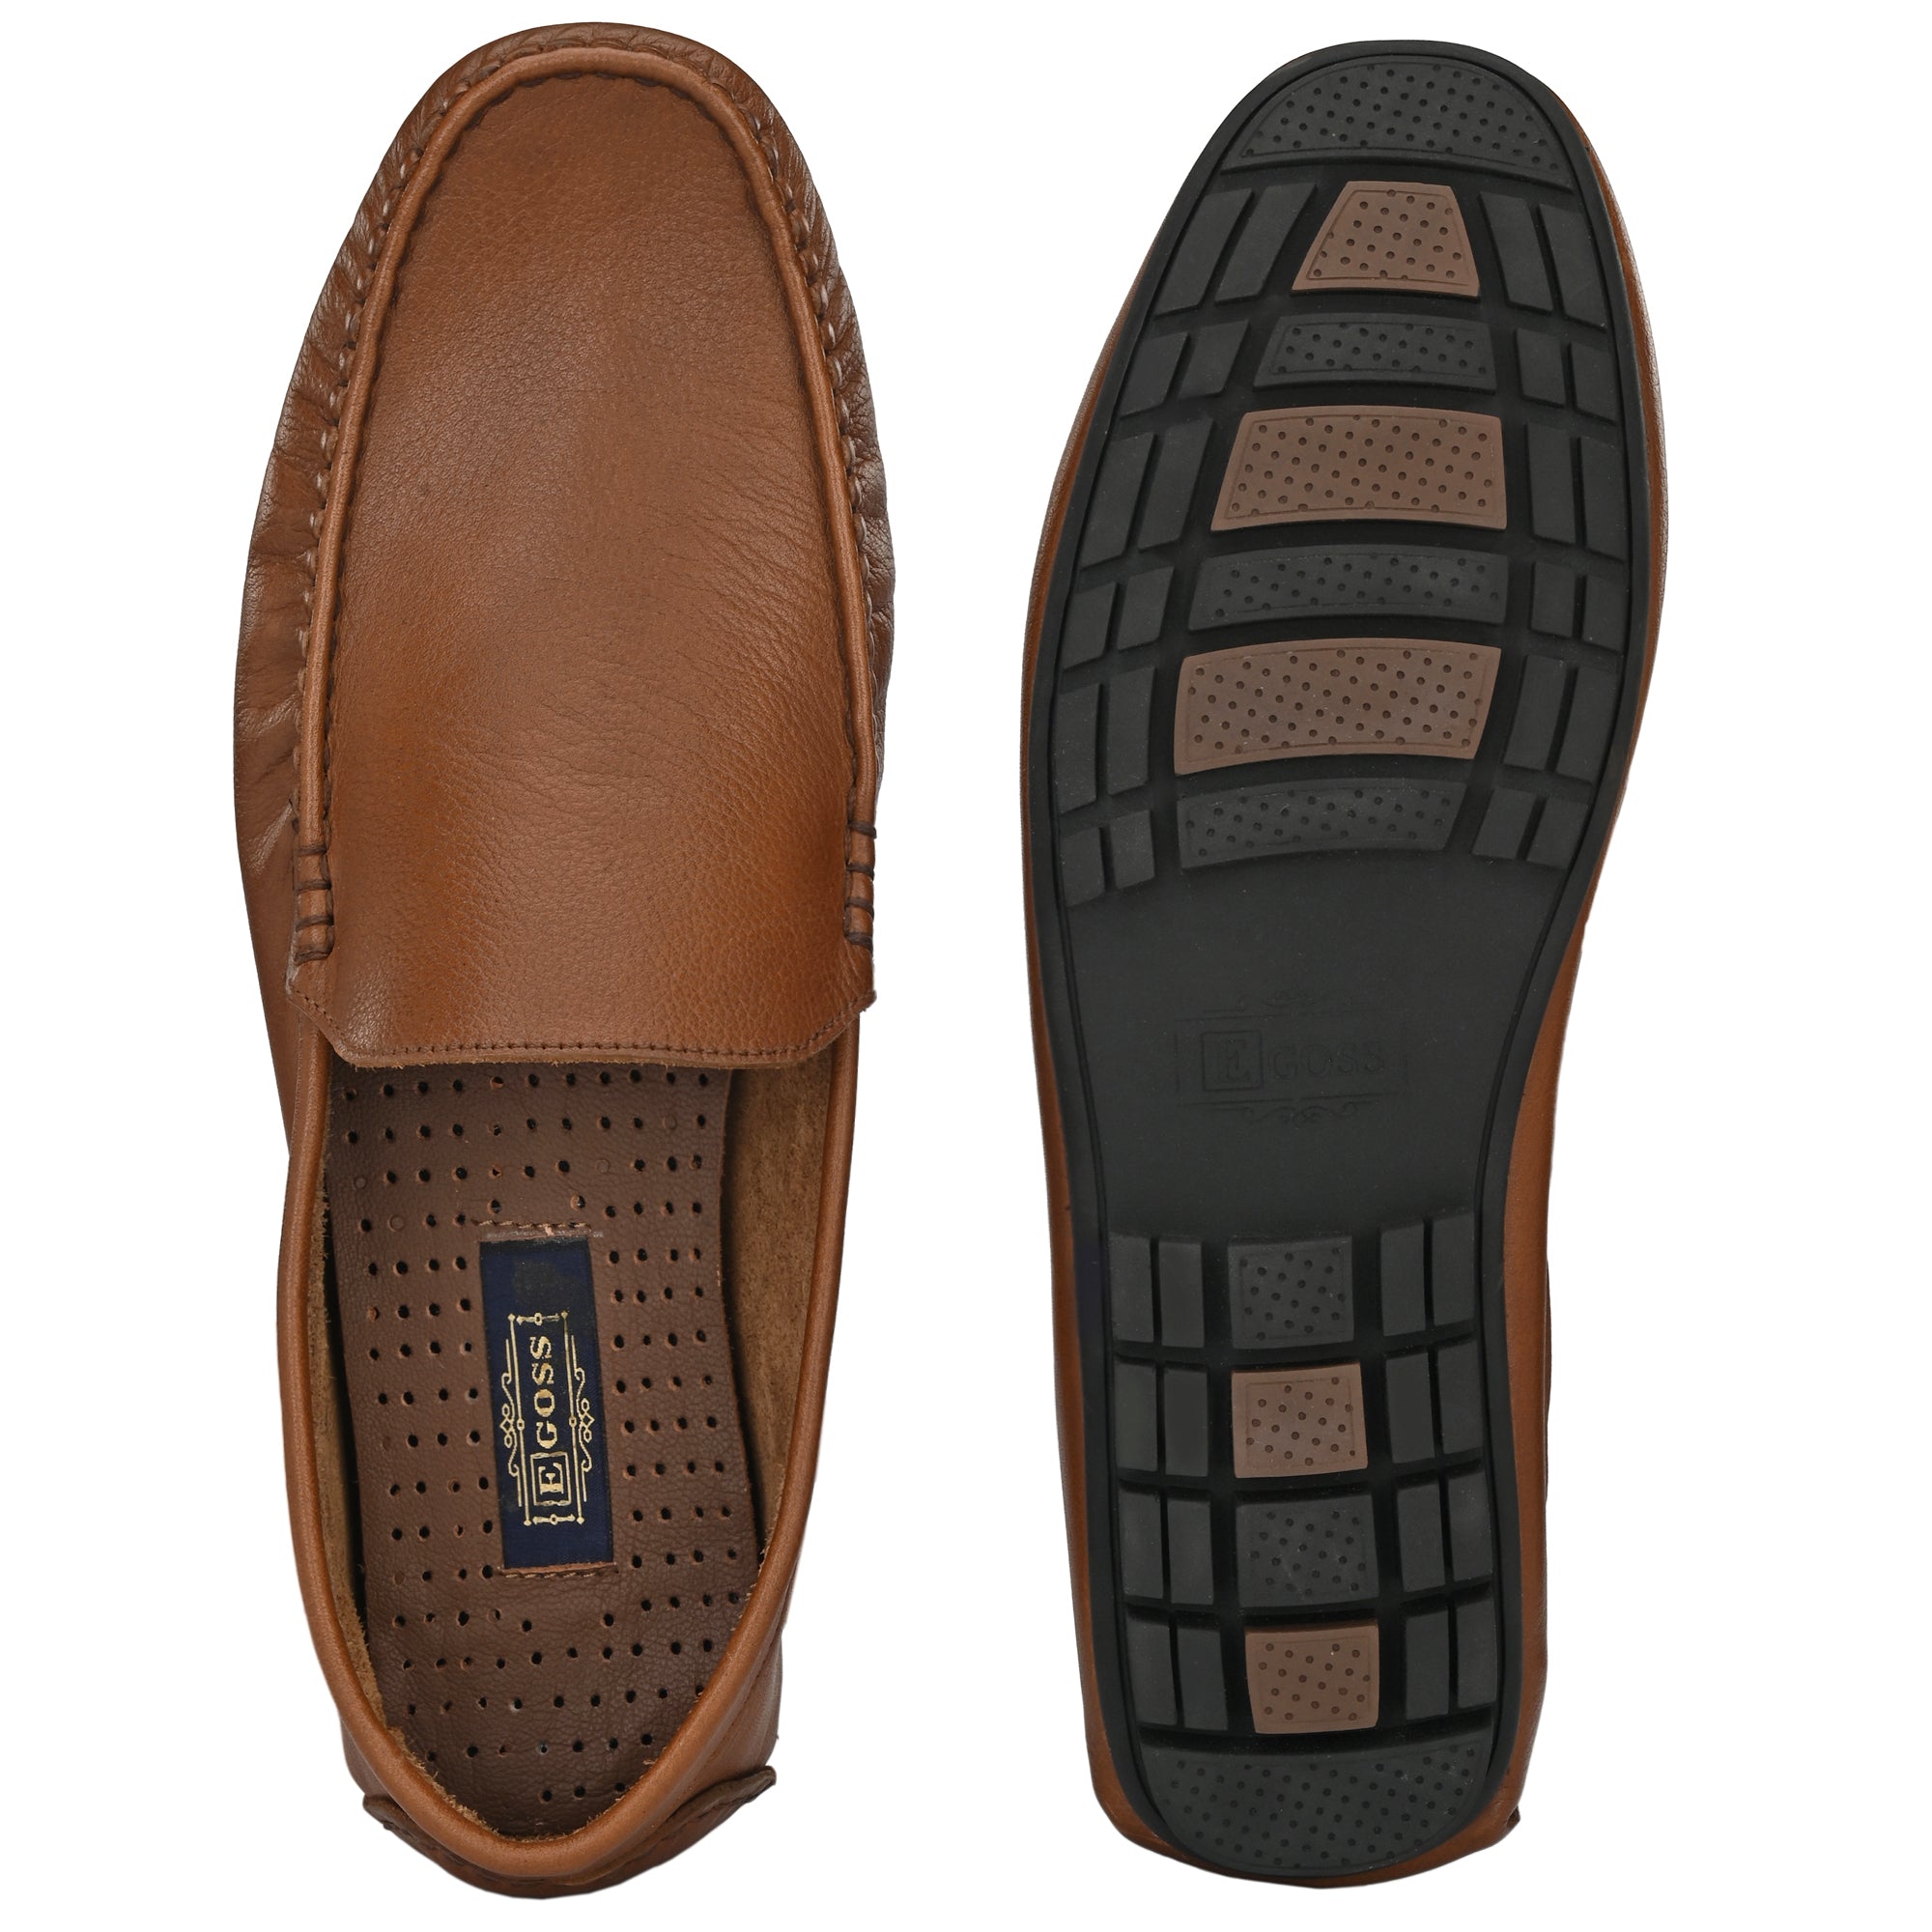 Egoss Casual Slip on Loafers Shoes For Men